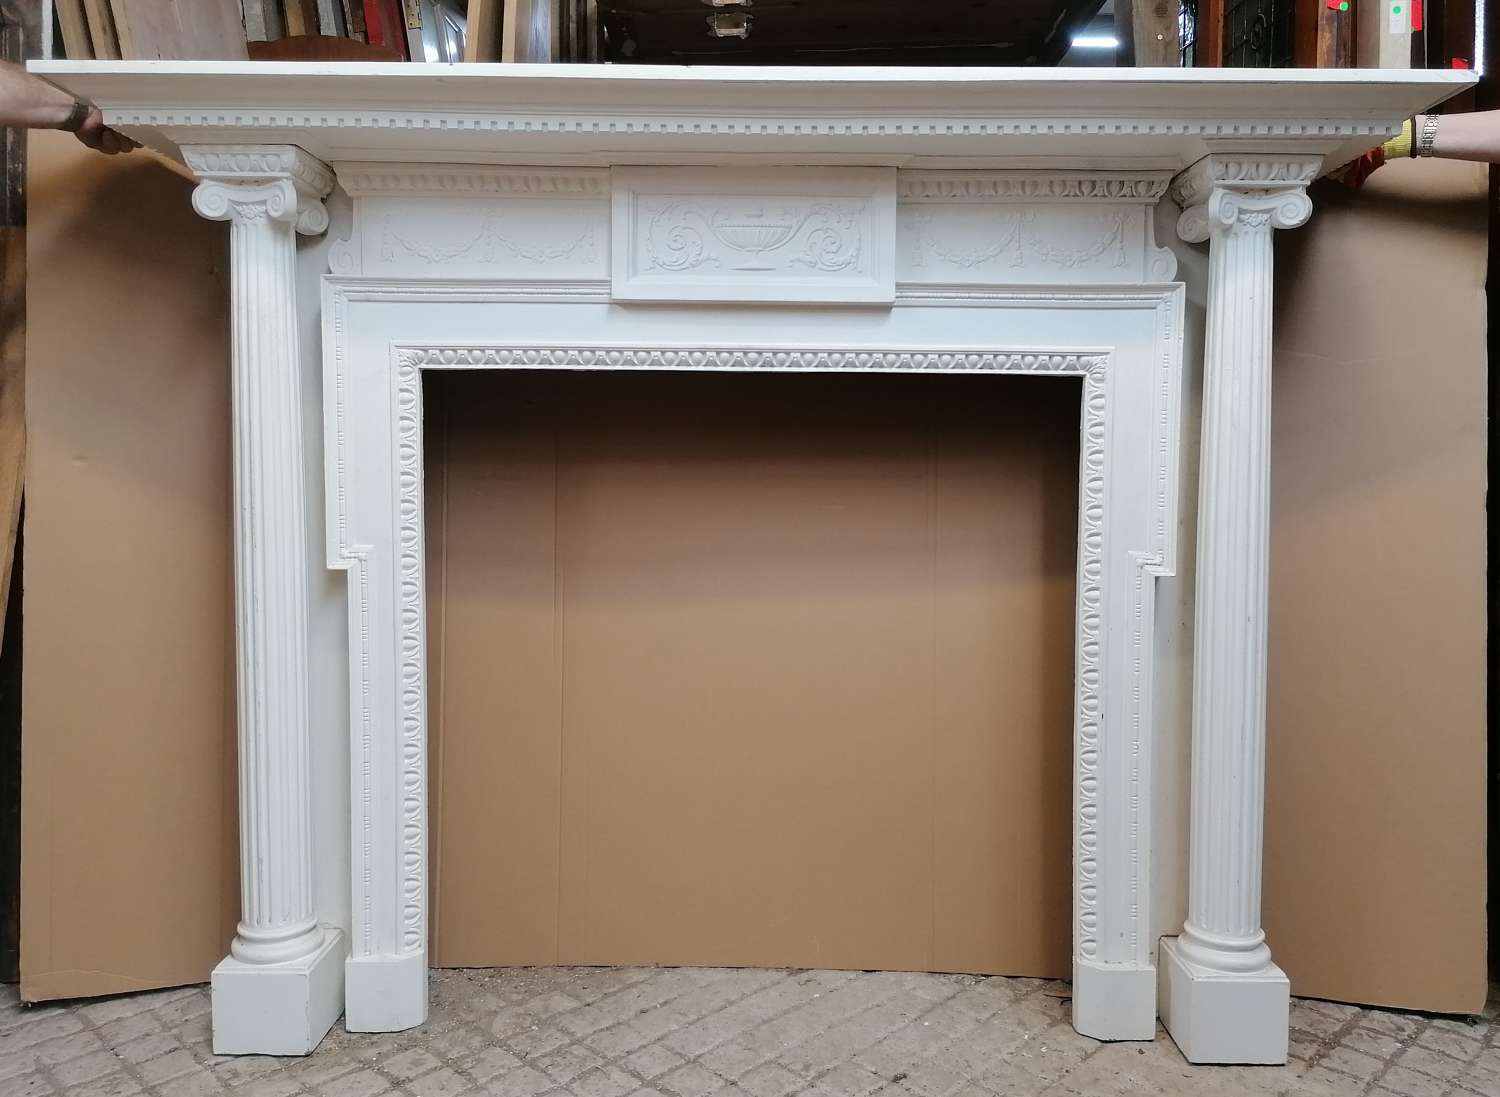 FS0214 VERY LARGE DECORATIVE PAINTED CAST IRON FIRE SURROUND